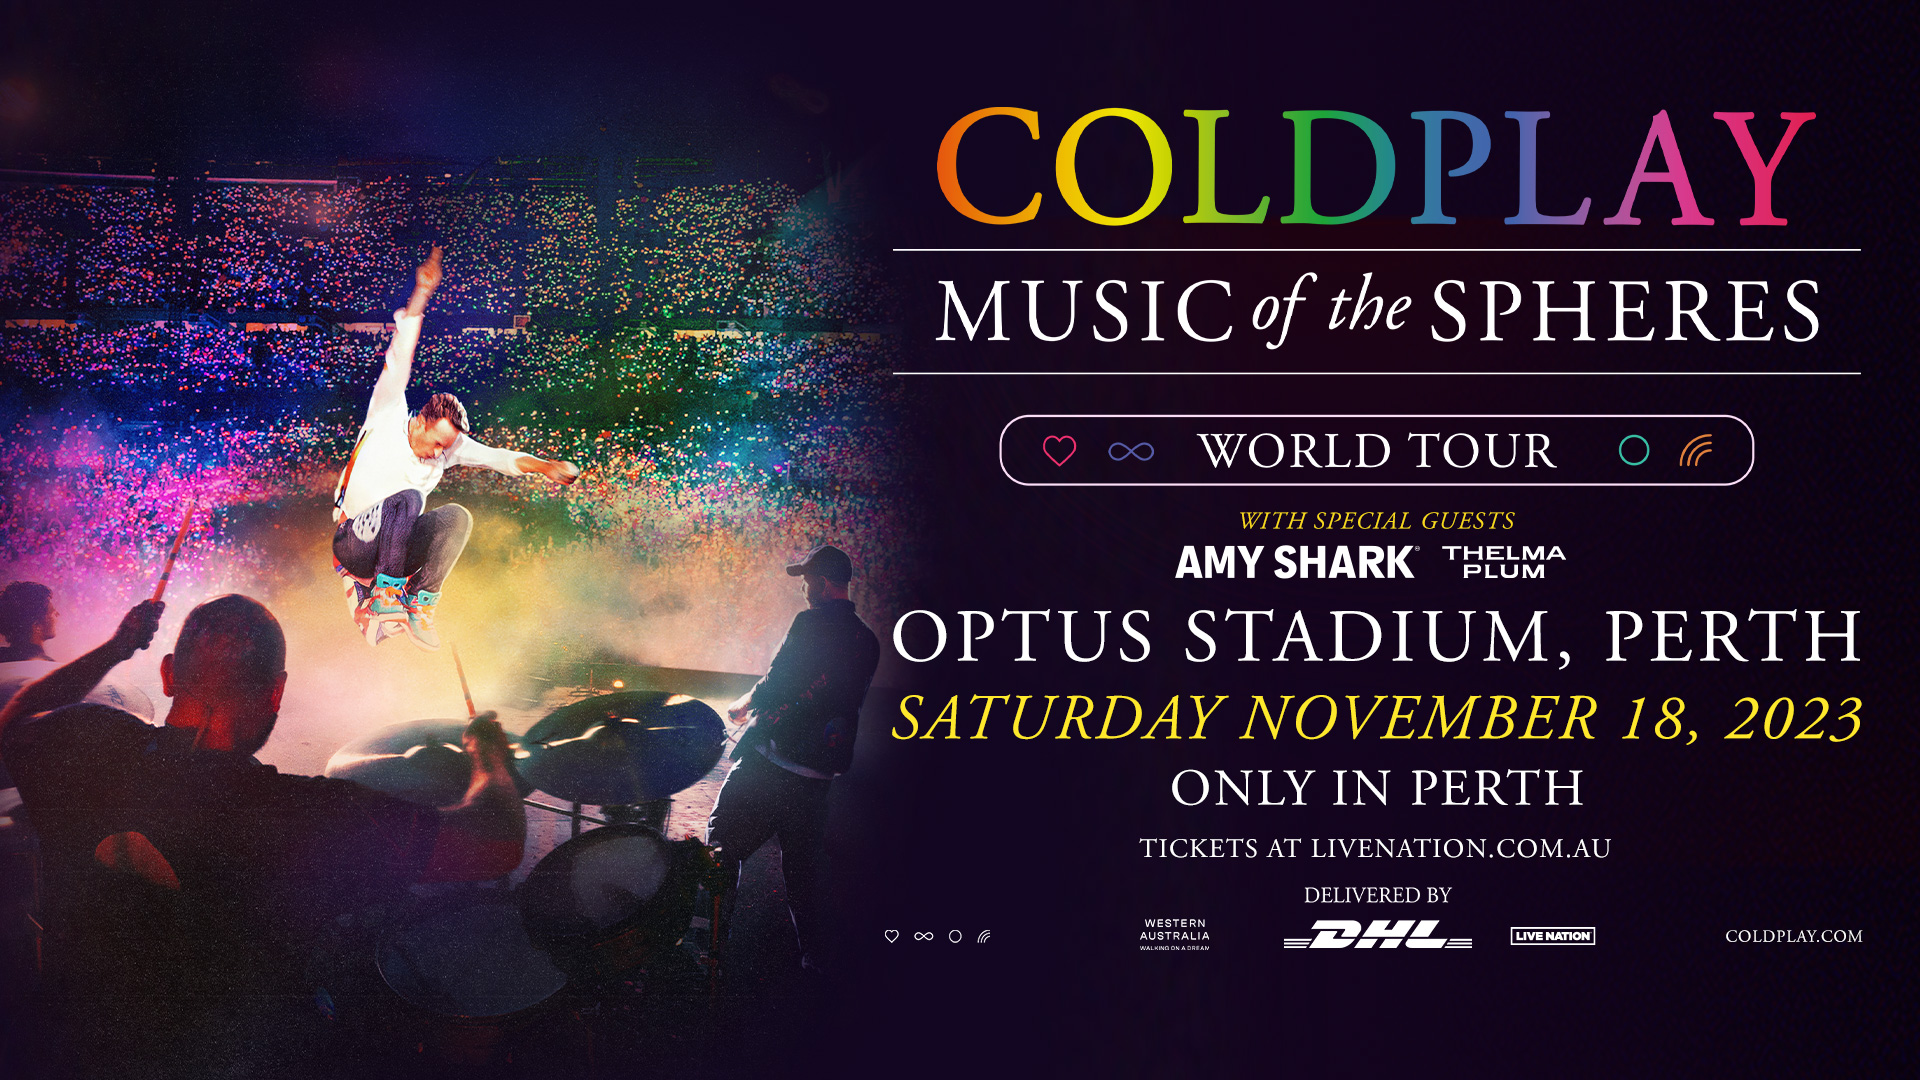 COLDPLAY Announce OneOff Australian 2023 Stadium Concert In Perth For